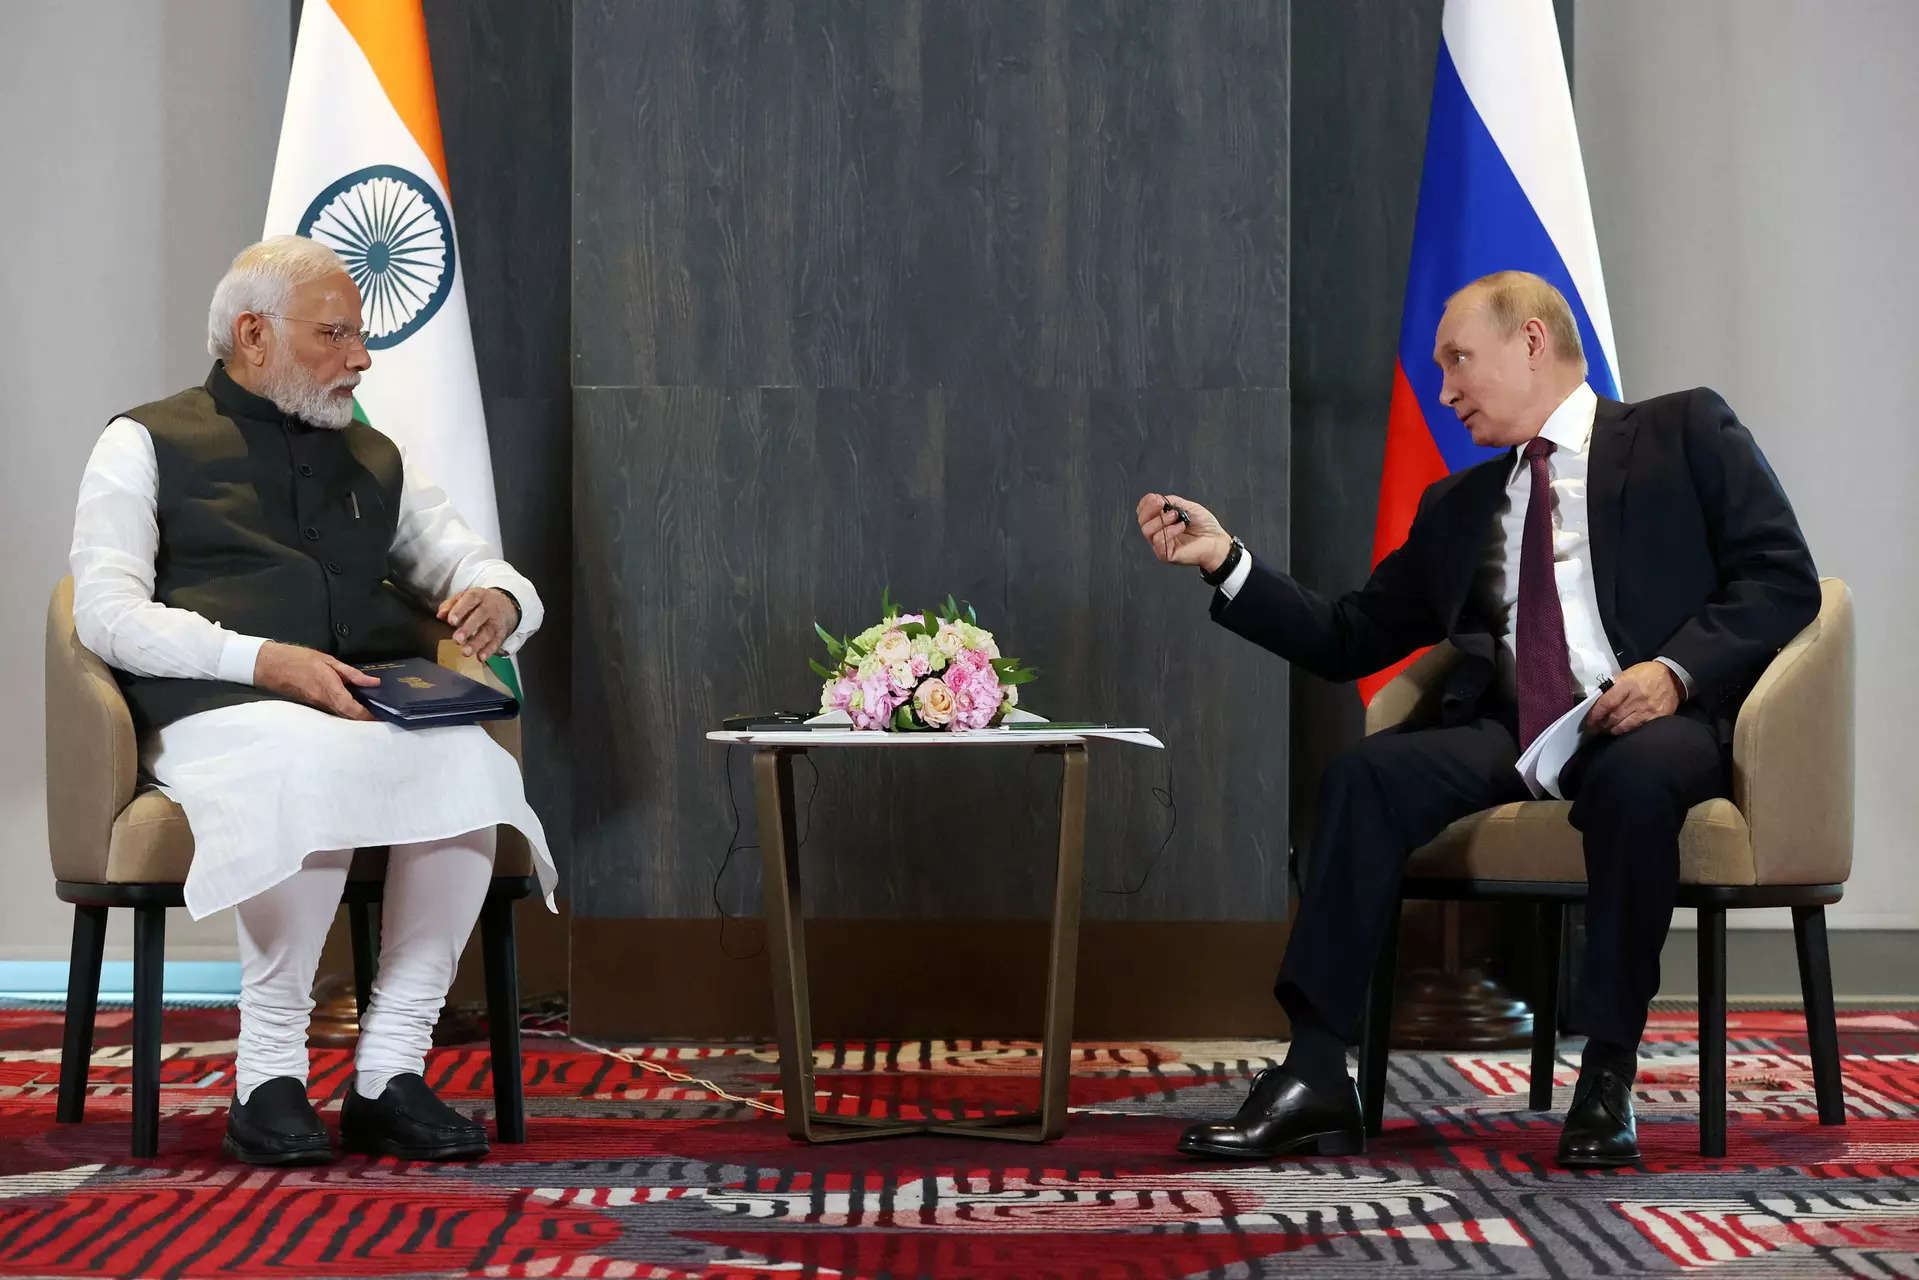 Early discharge of Indians from Russian army will be discussed during Modi's visit to Moscow, says Foreign Secy Kwatra 